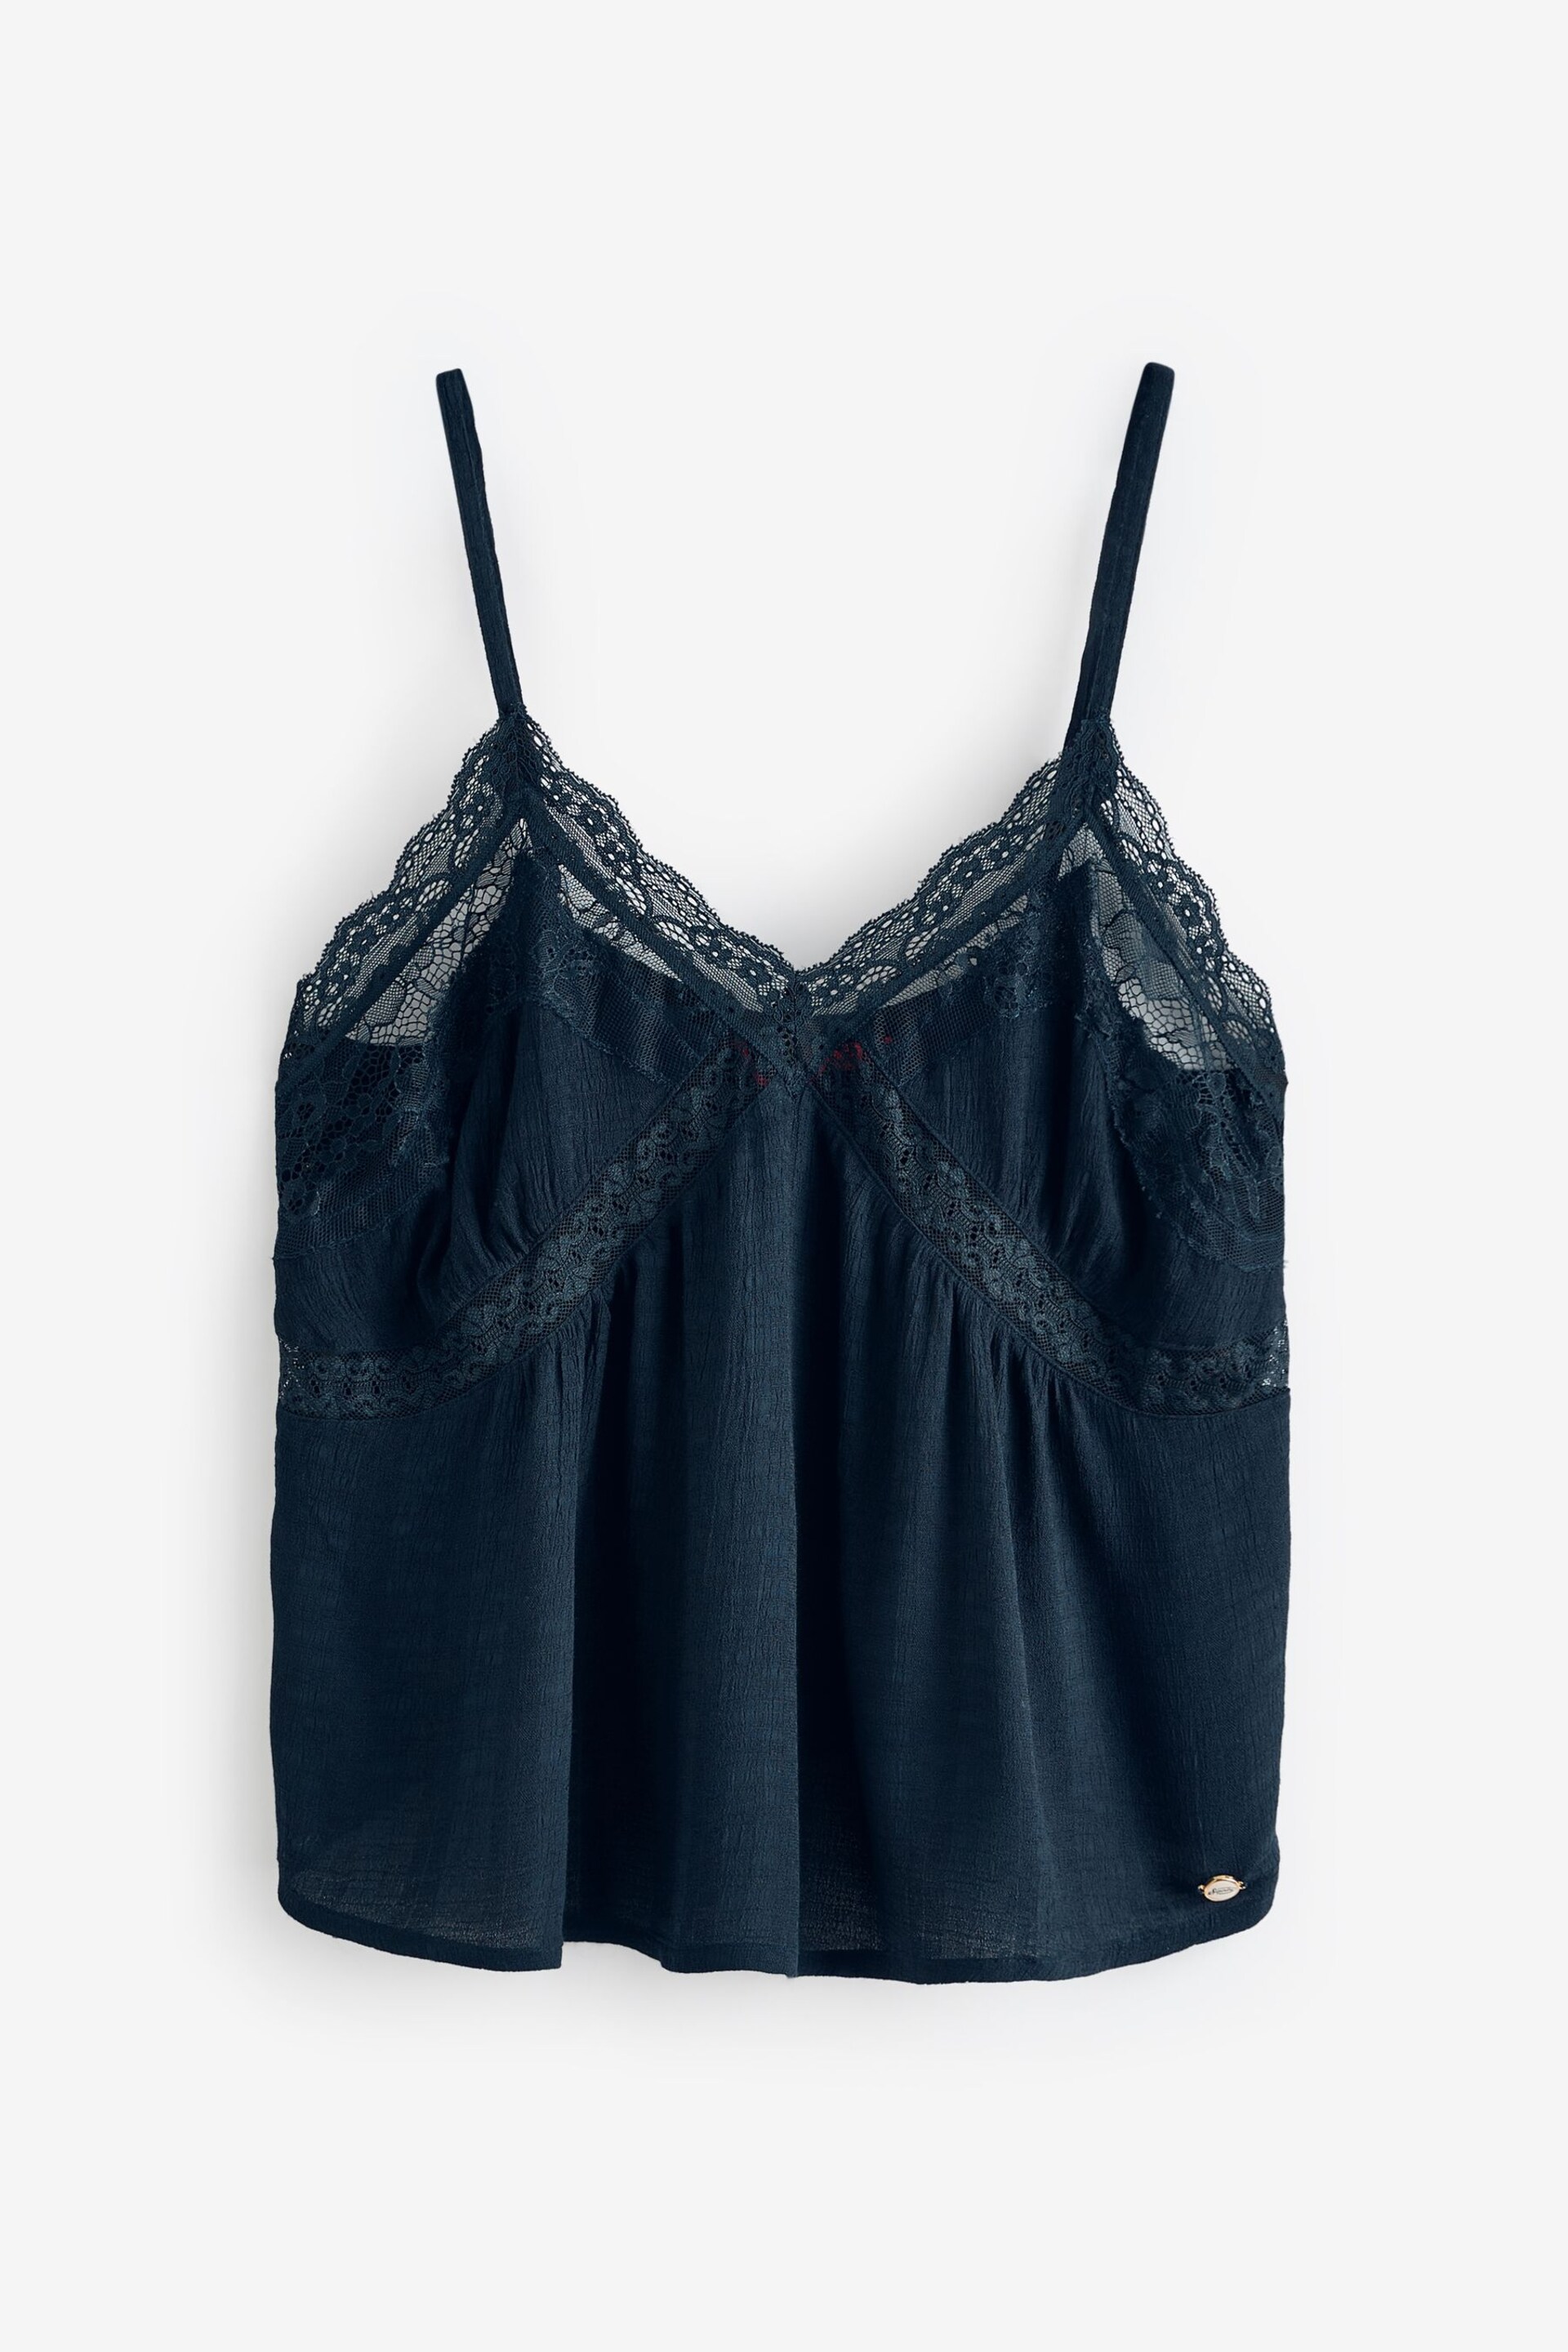 Superdry Blue Ibiza Sheer Lace Cami Top - Image 1 of 1